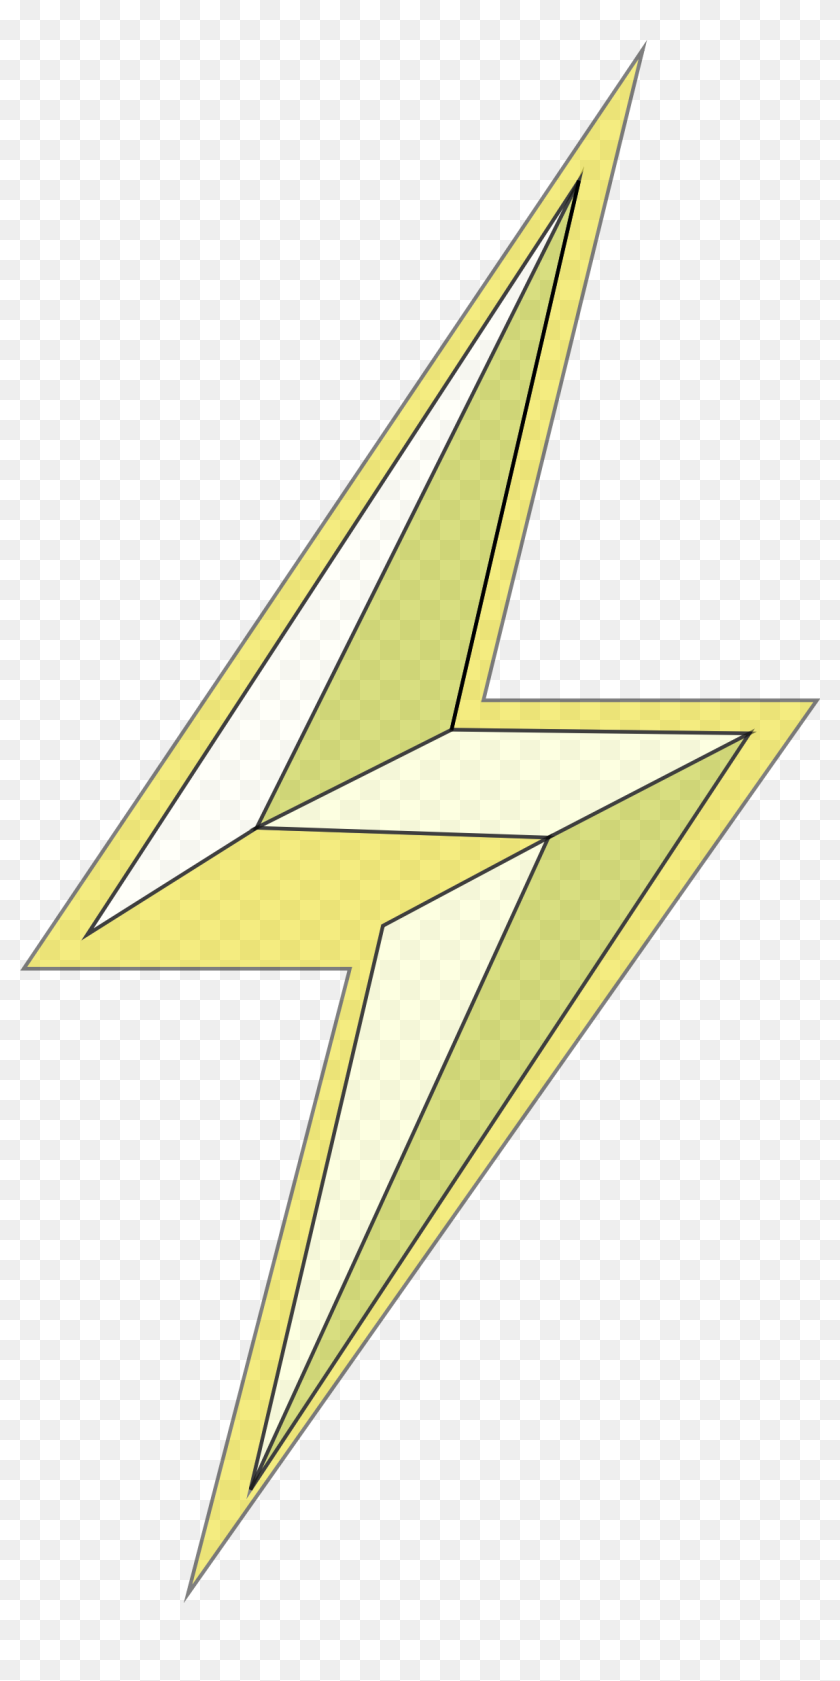 Lightning Electricity Photography Clip Art - Lightning Bolts Transparent  Clipart, HD Png Download - 1177x2300(#6760676) - PngFind